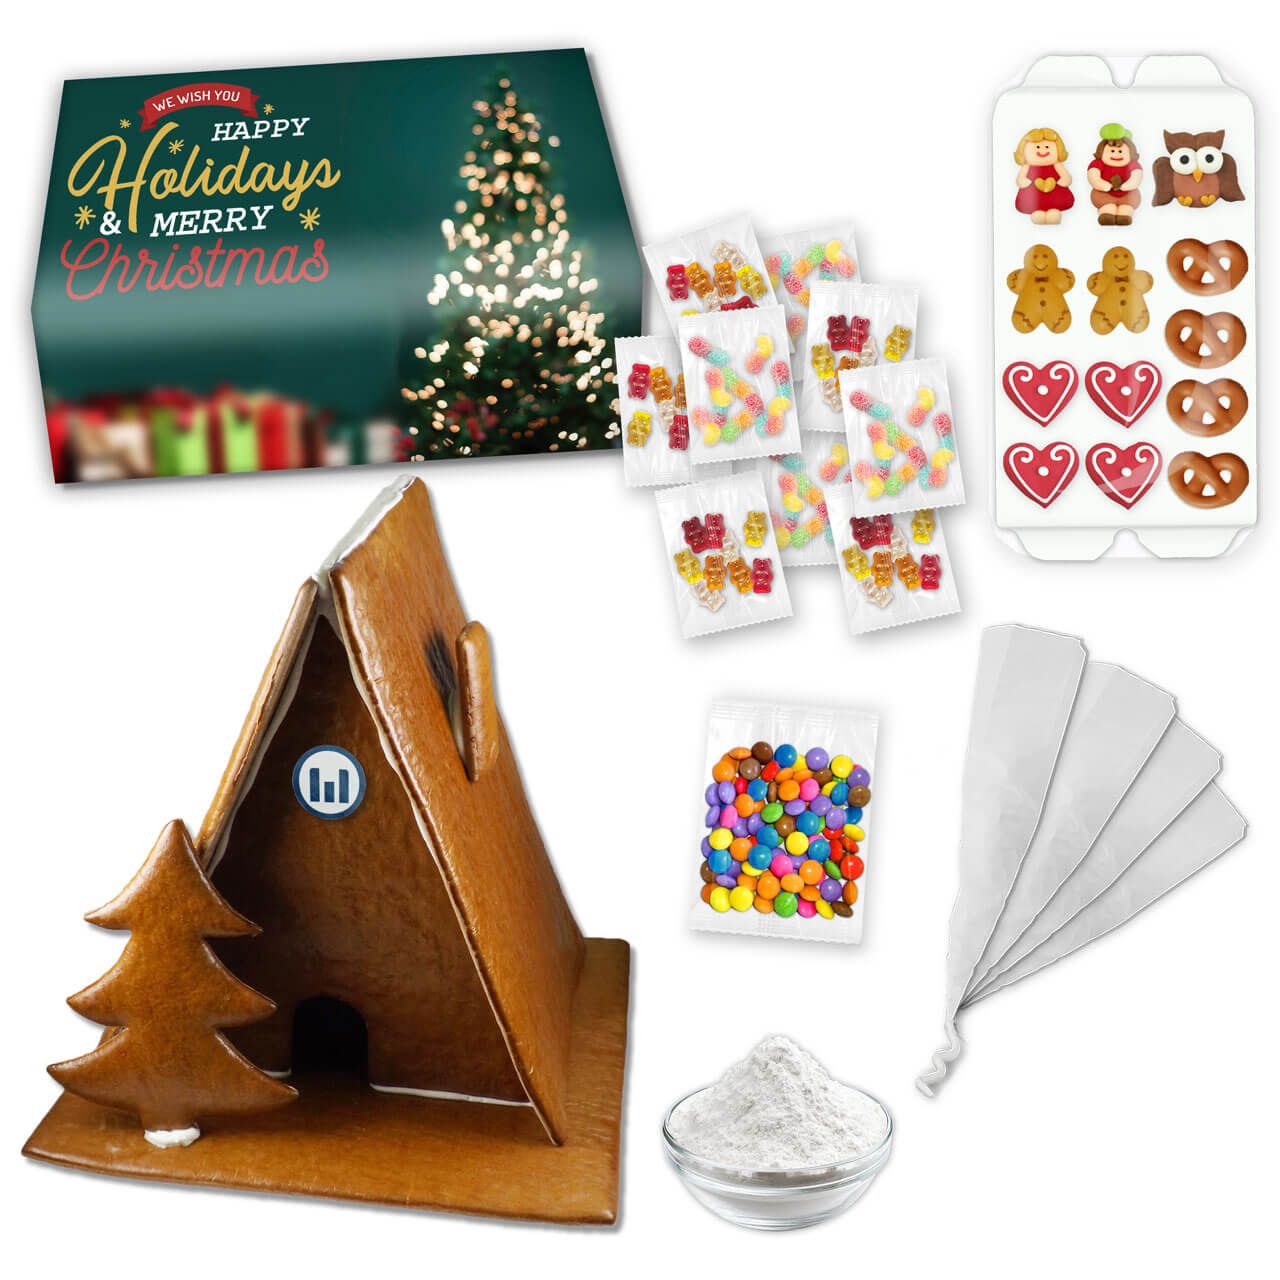 Giant gingerbread house kit in a personalized box - complete set